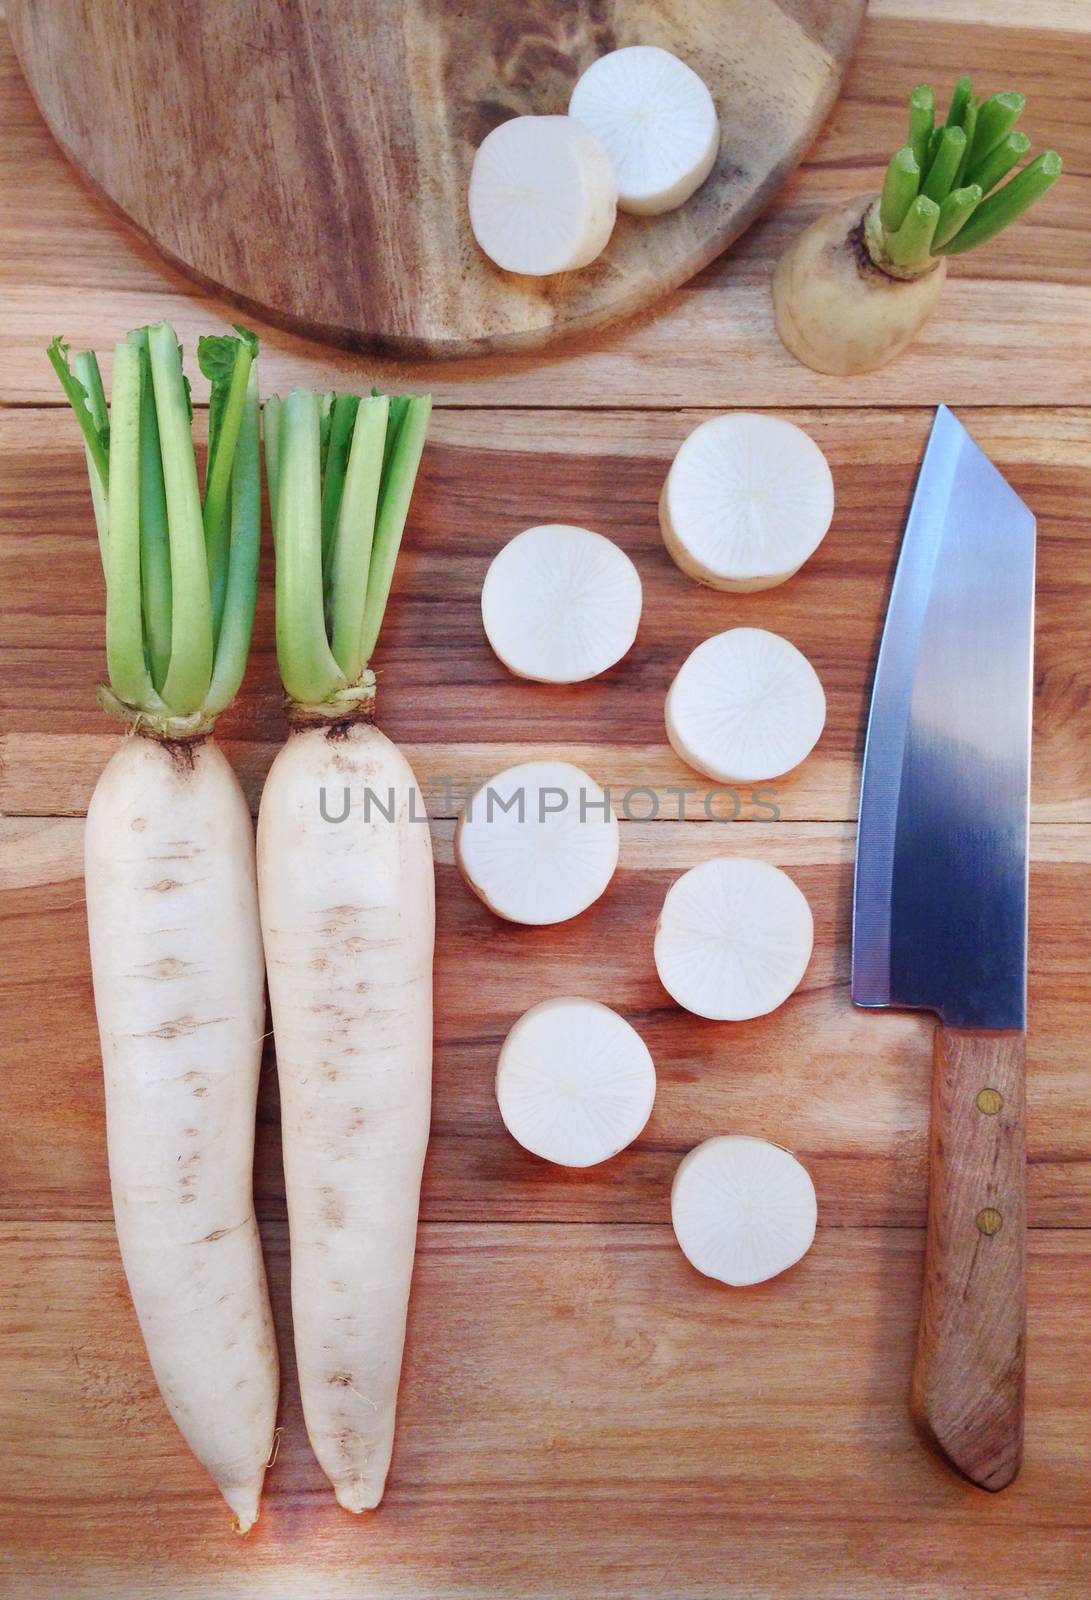 White daikon radish with sliced pieces on wooden table by Bowonpat